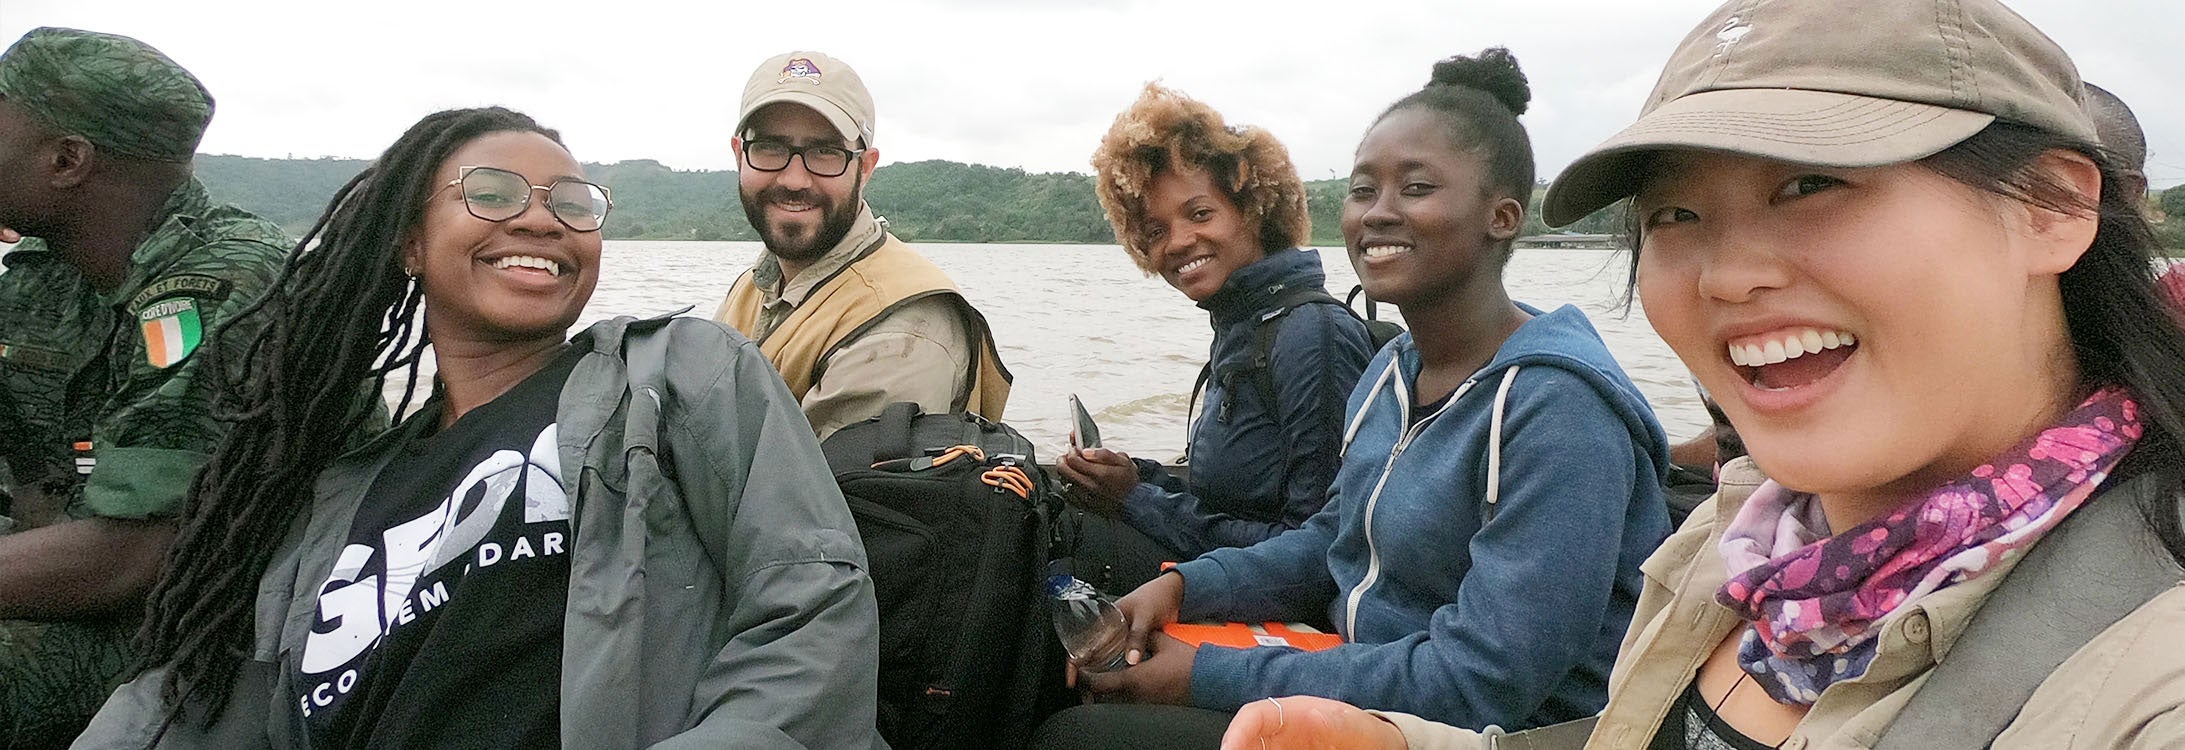 ECU Assistant Professor David Lagomasino, center, travels on a boat with students and research colleagues in West Africa. Lagomasino visited the region in August to study the coastal ecosystem which resembles North Carolina’s coast.